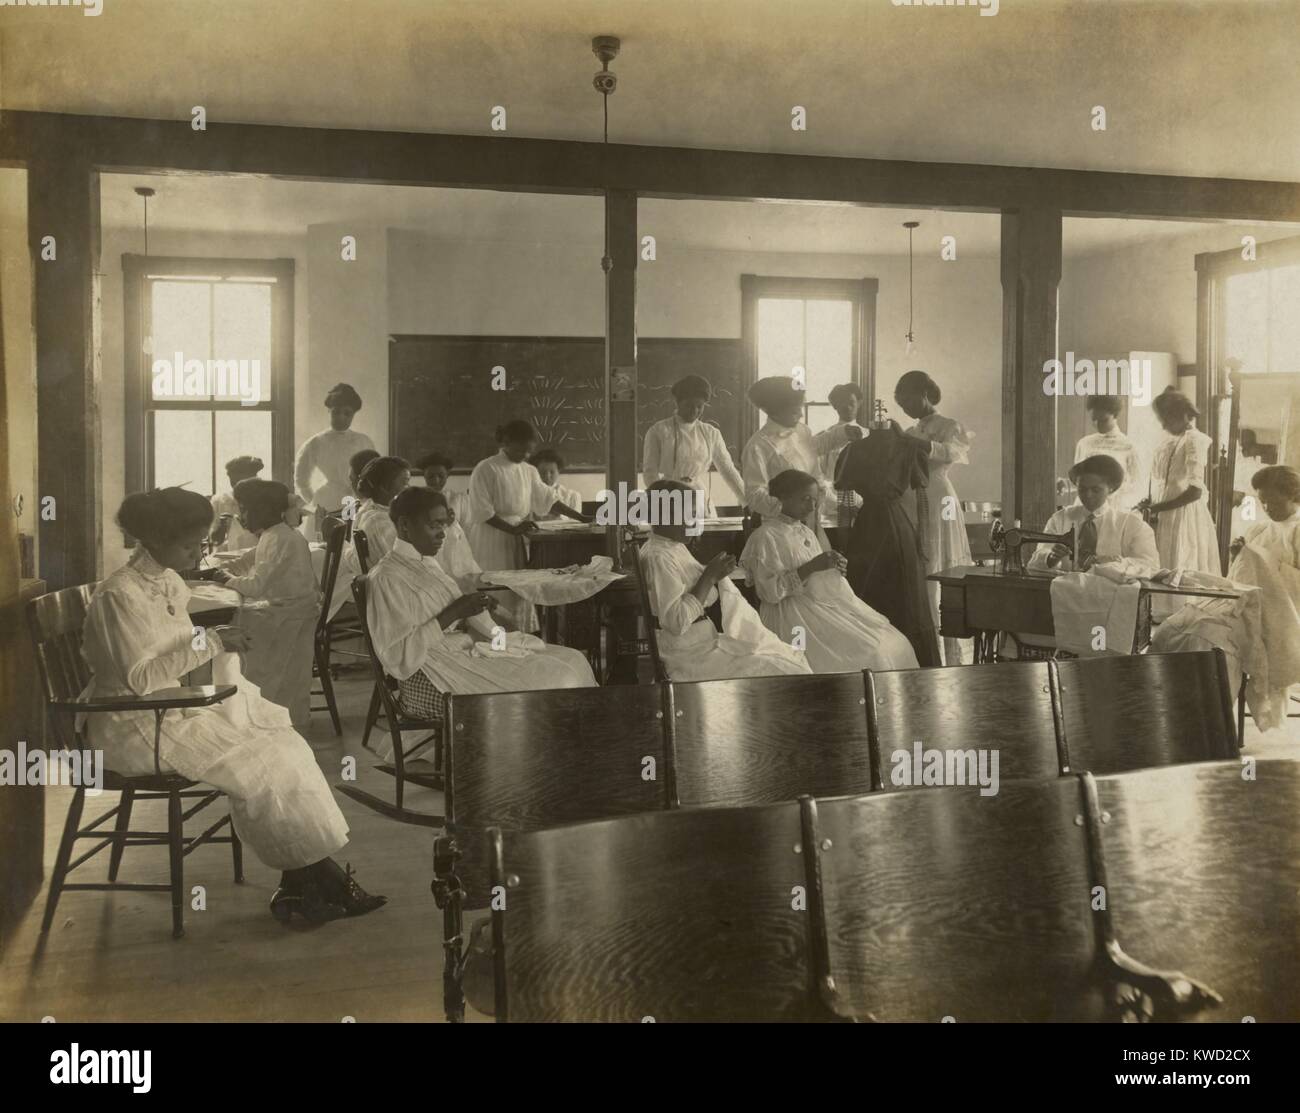 African-American women sewing by hand and with sewing machine in classroom, c. 1911-18. Nannie Helen Burroughs founded the National Training School for Women and Girls, in Washington, D.C. , as to train Black women for skilled domestic work  (BSLOC 2017 20 142) Stock Photo